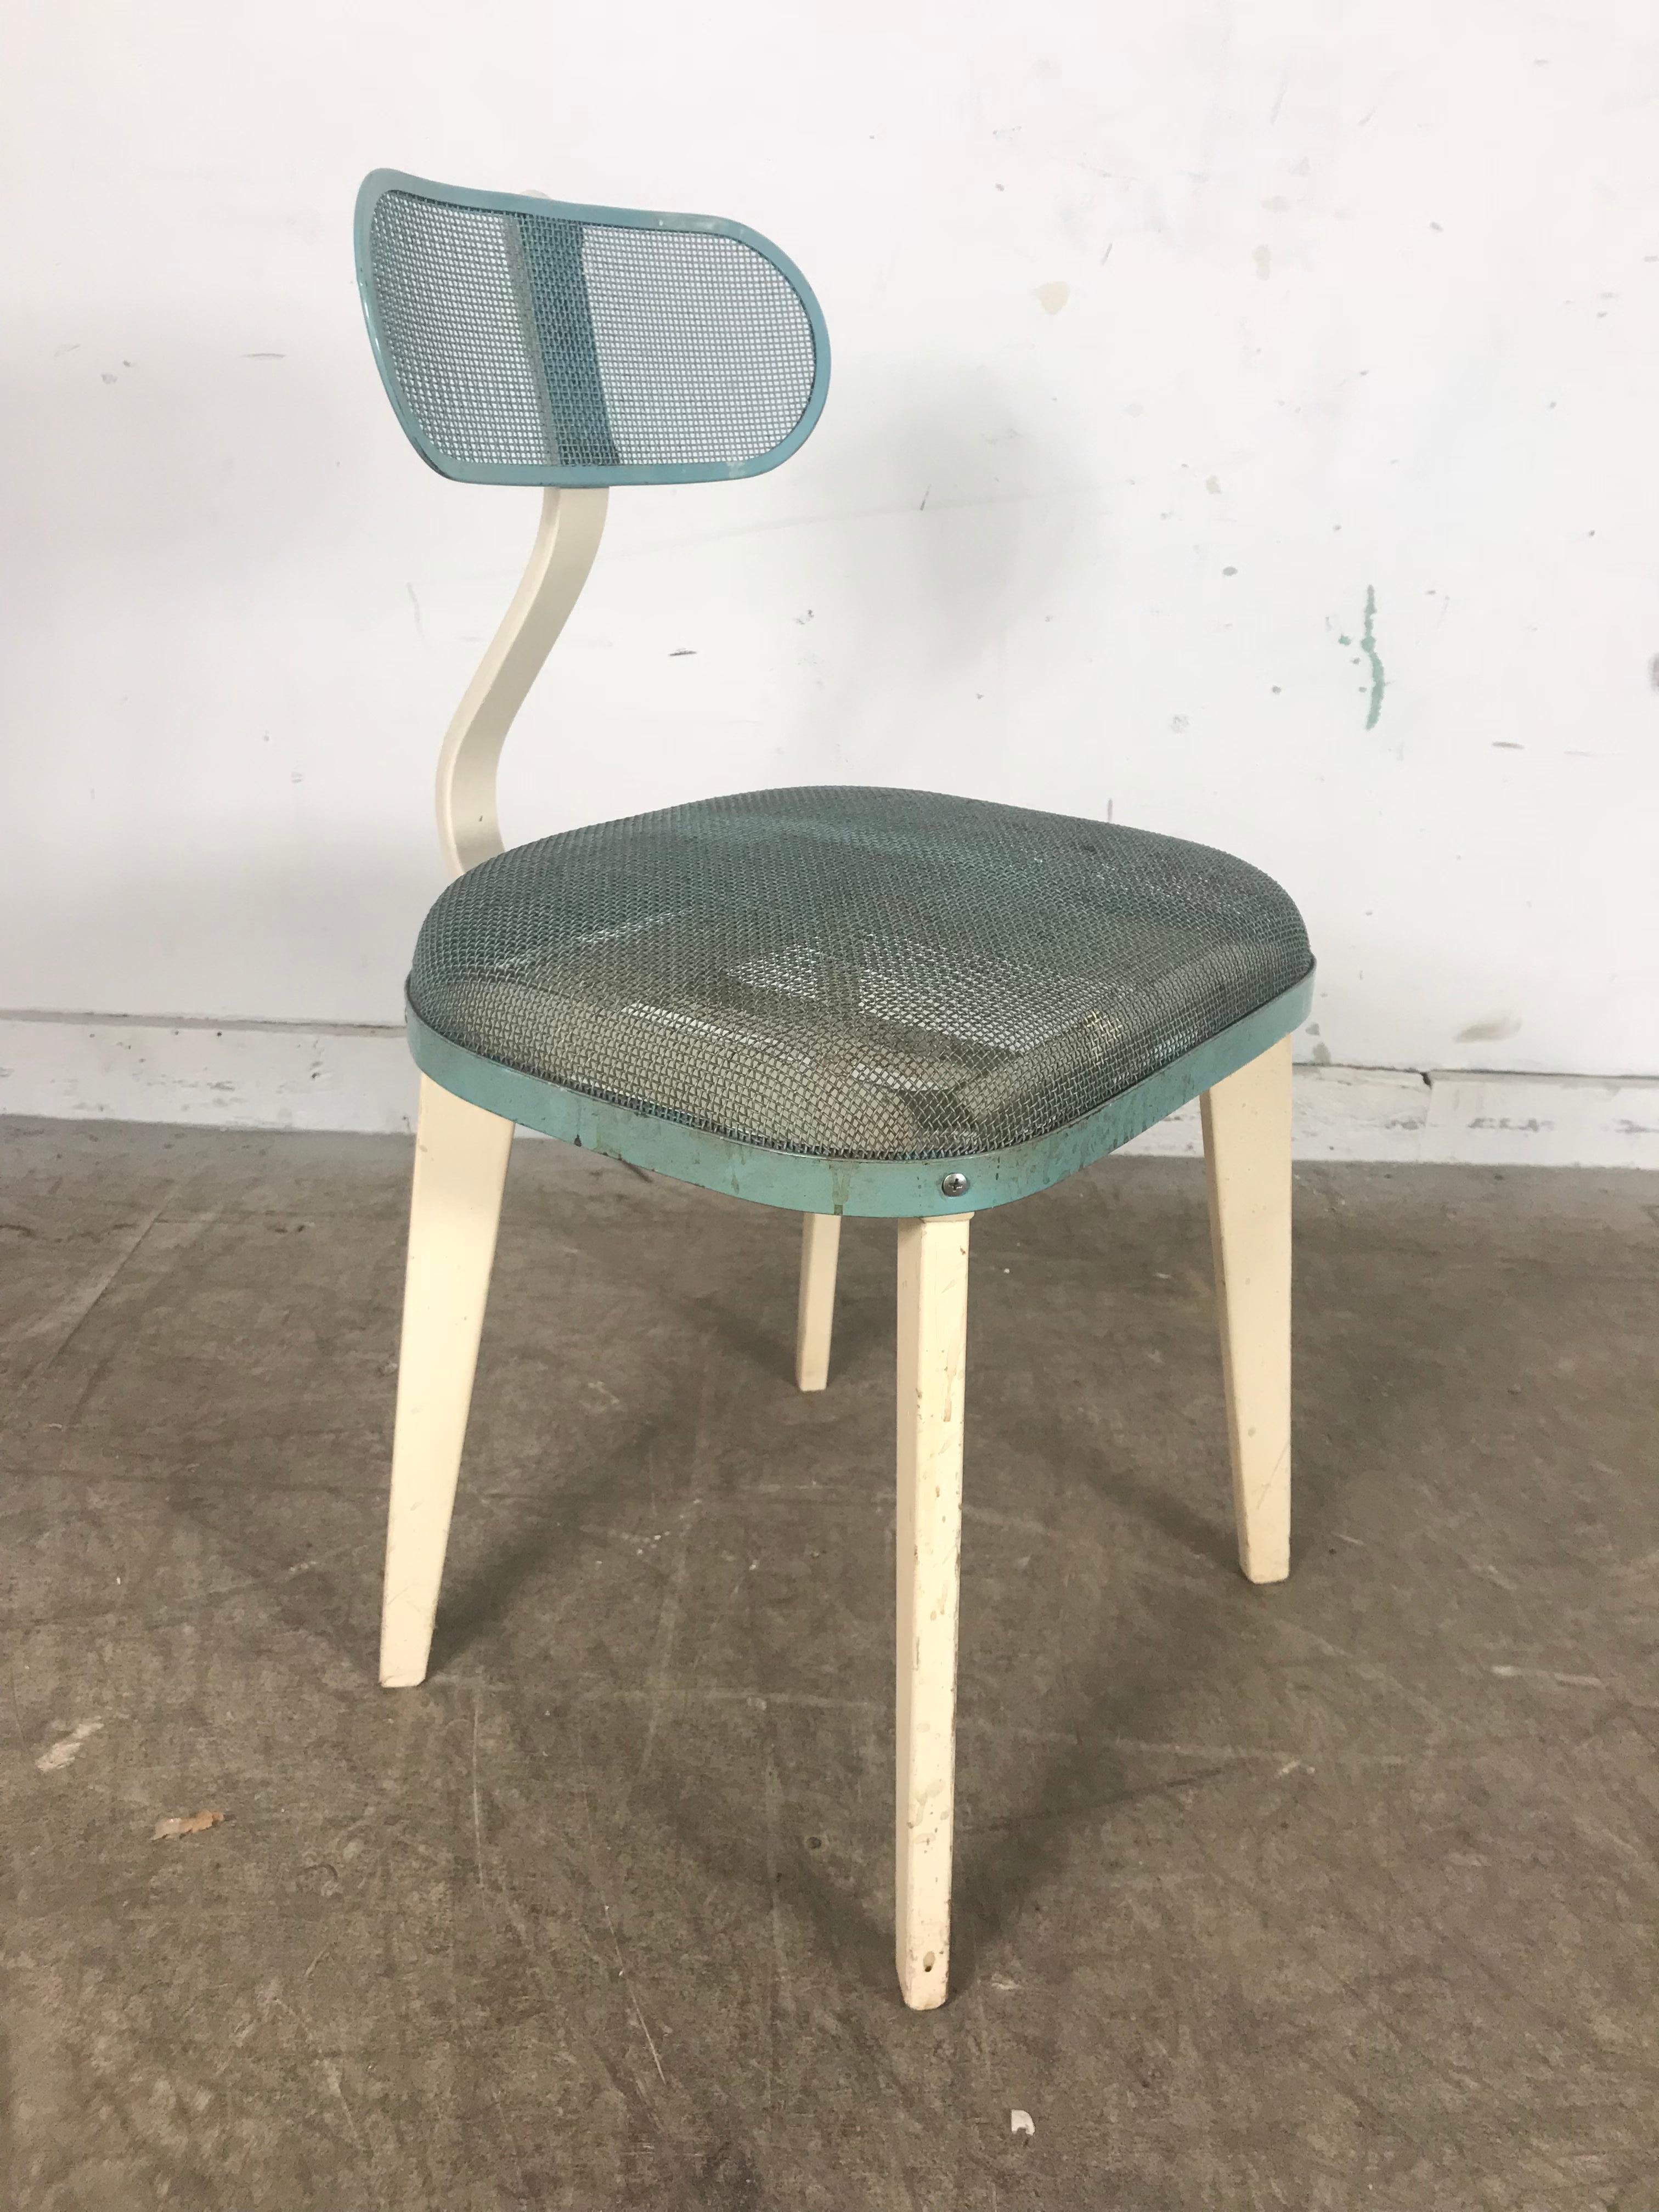 Industrial sculptural mesh steel side chair, Horton Texteel Ironer chair, wonderful design, retains original paint as well as original label, adjustable back. Extremely comfortable, handsome desk chair.